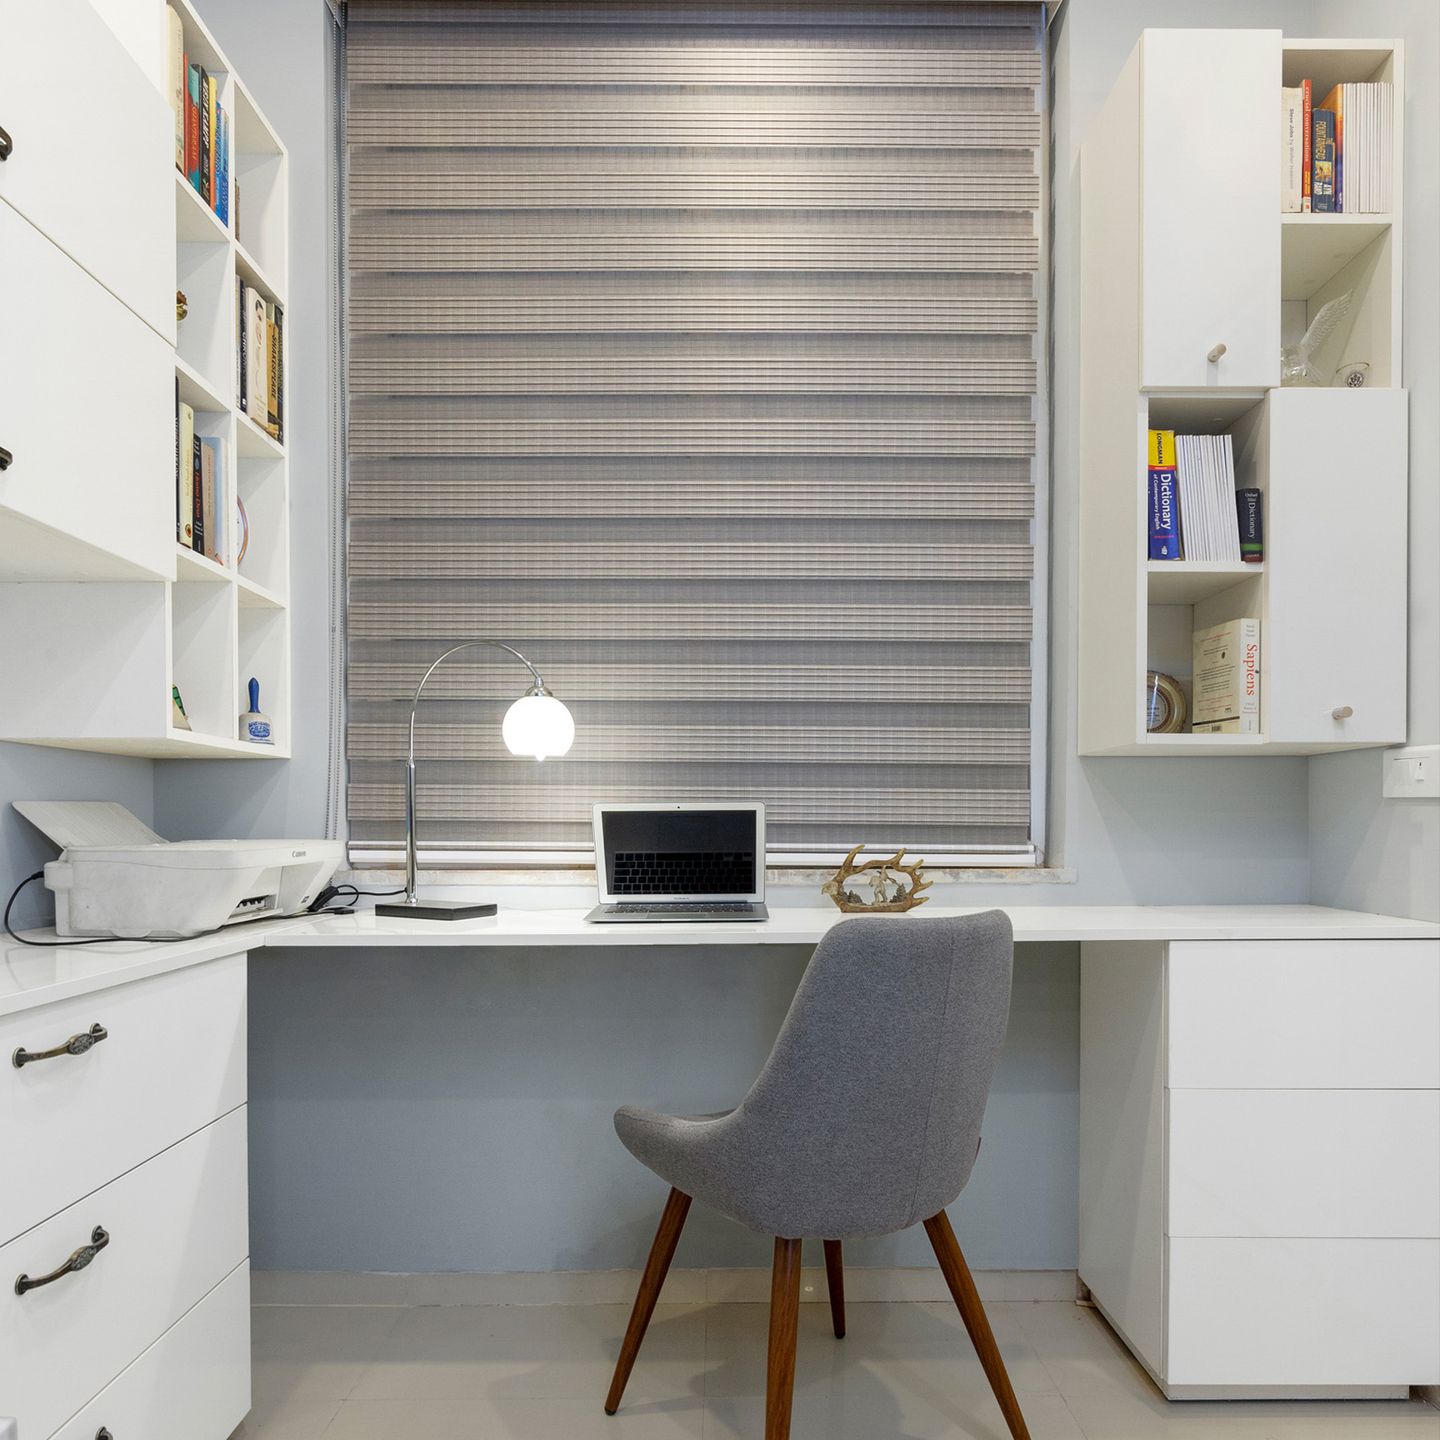 Modern Frosty White Home Office Design With Overhead Cabinets - Livspace